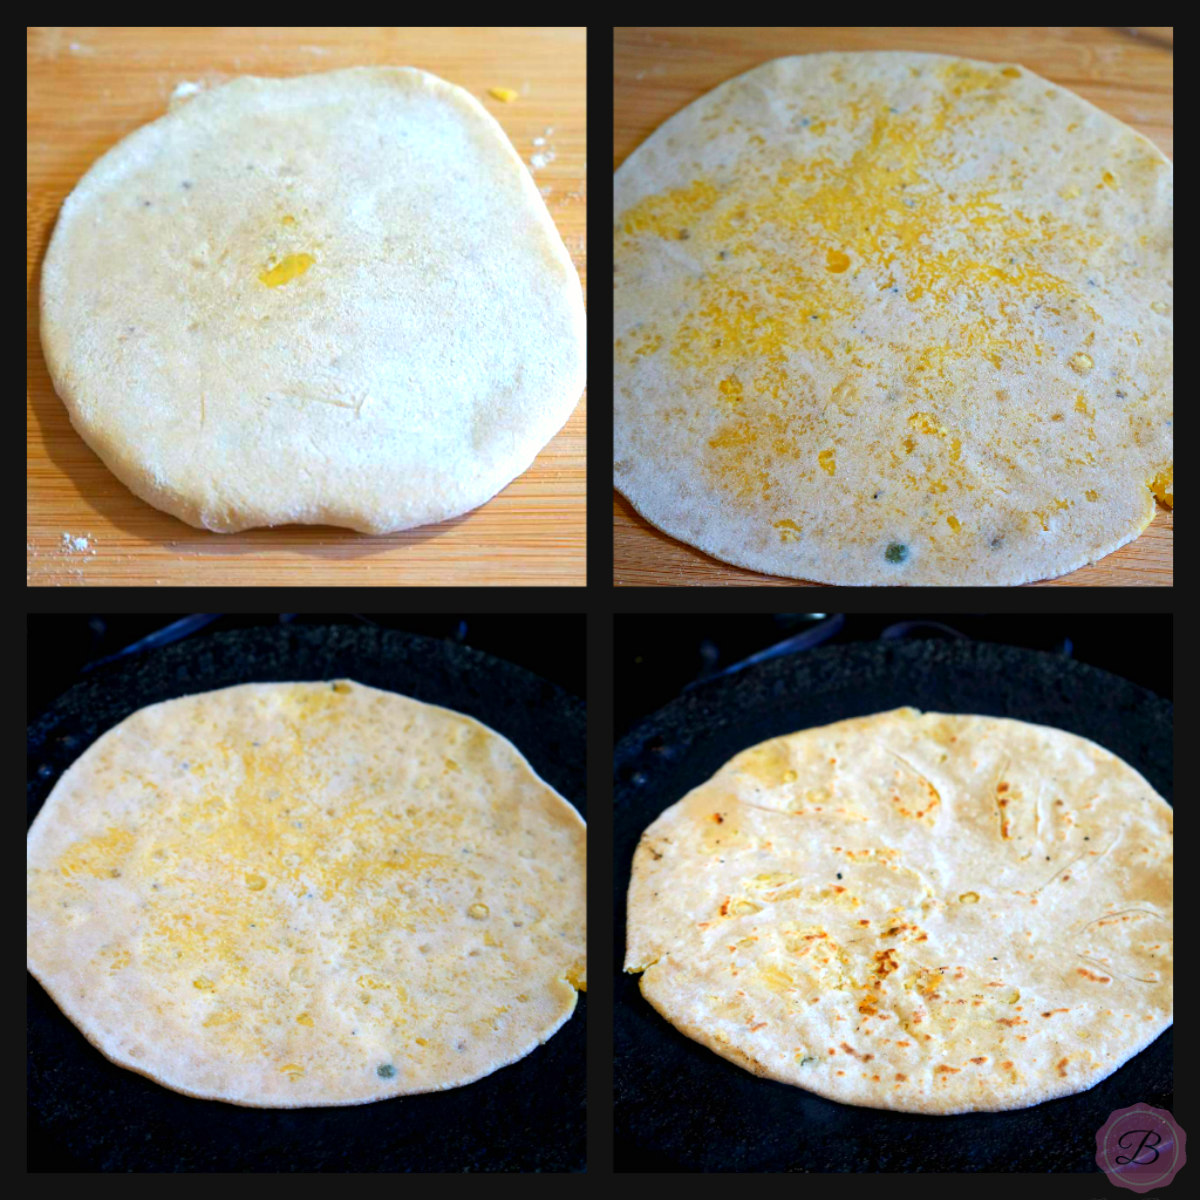 Steps Showing How to Roll and Cook the Puran Poli Flatbread